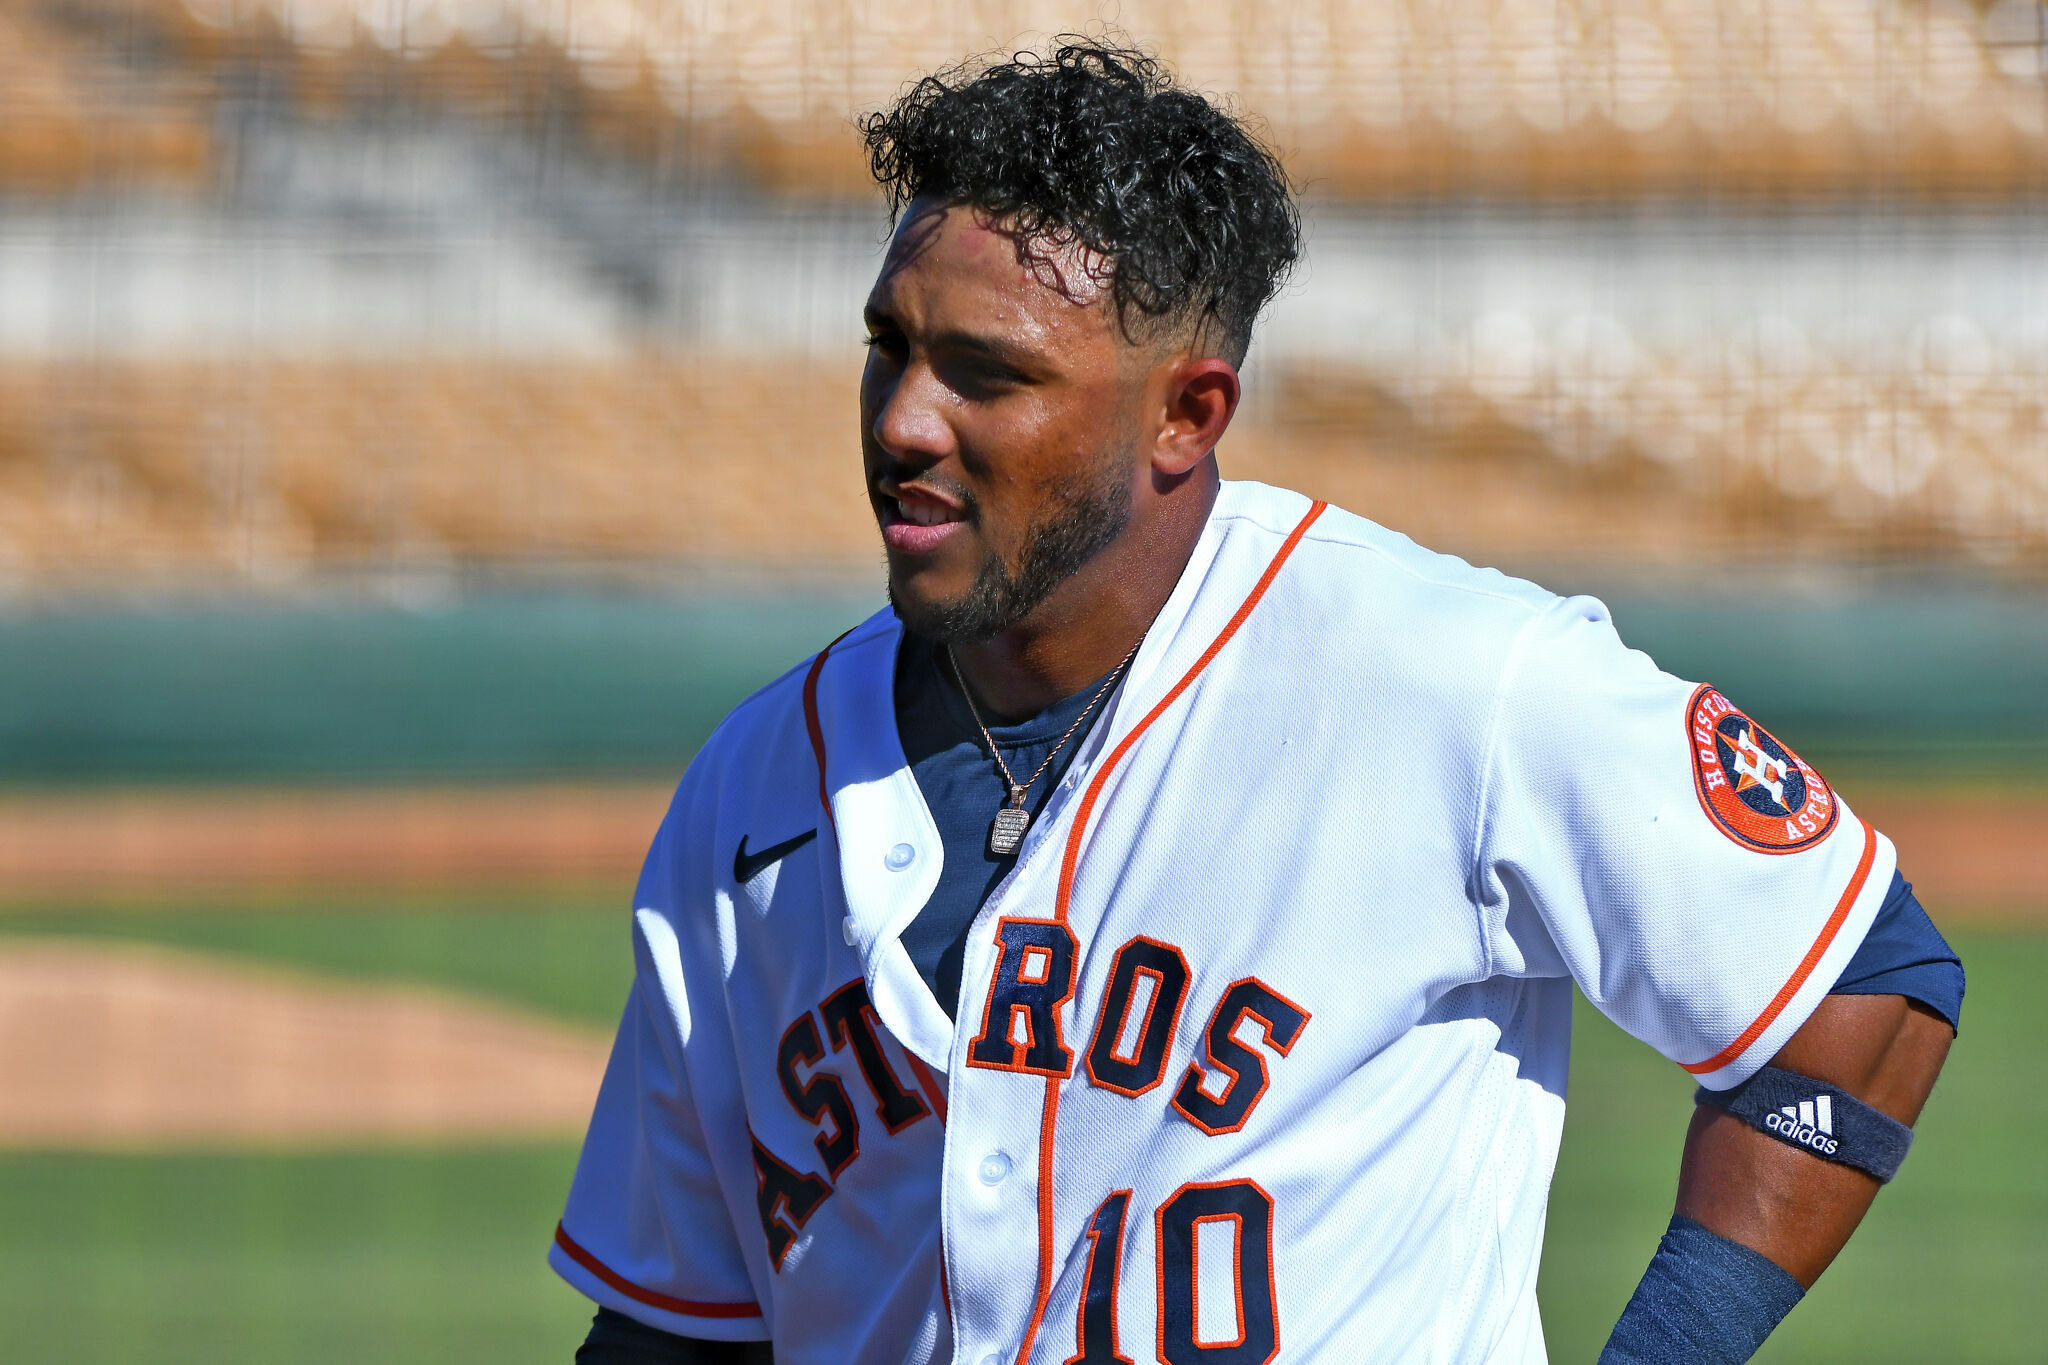 Why Astros' young players continue to defy prospect rankings